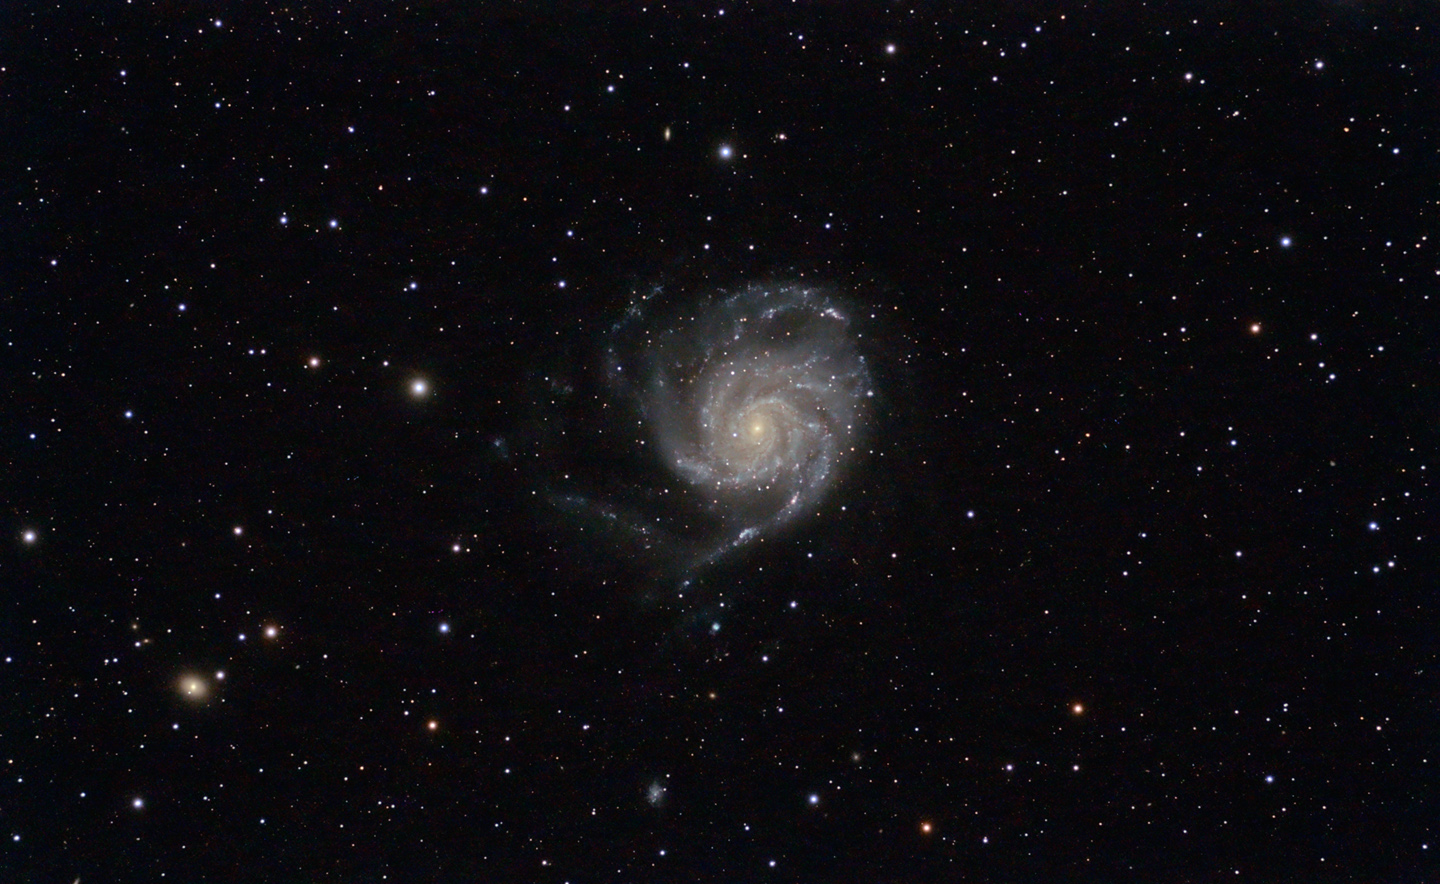 Photograph of M101